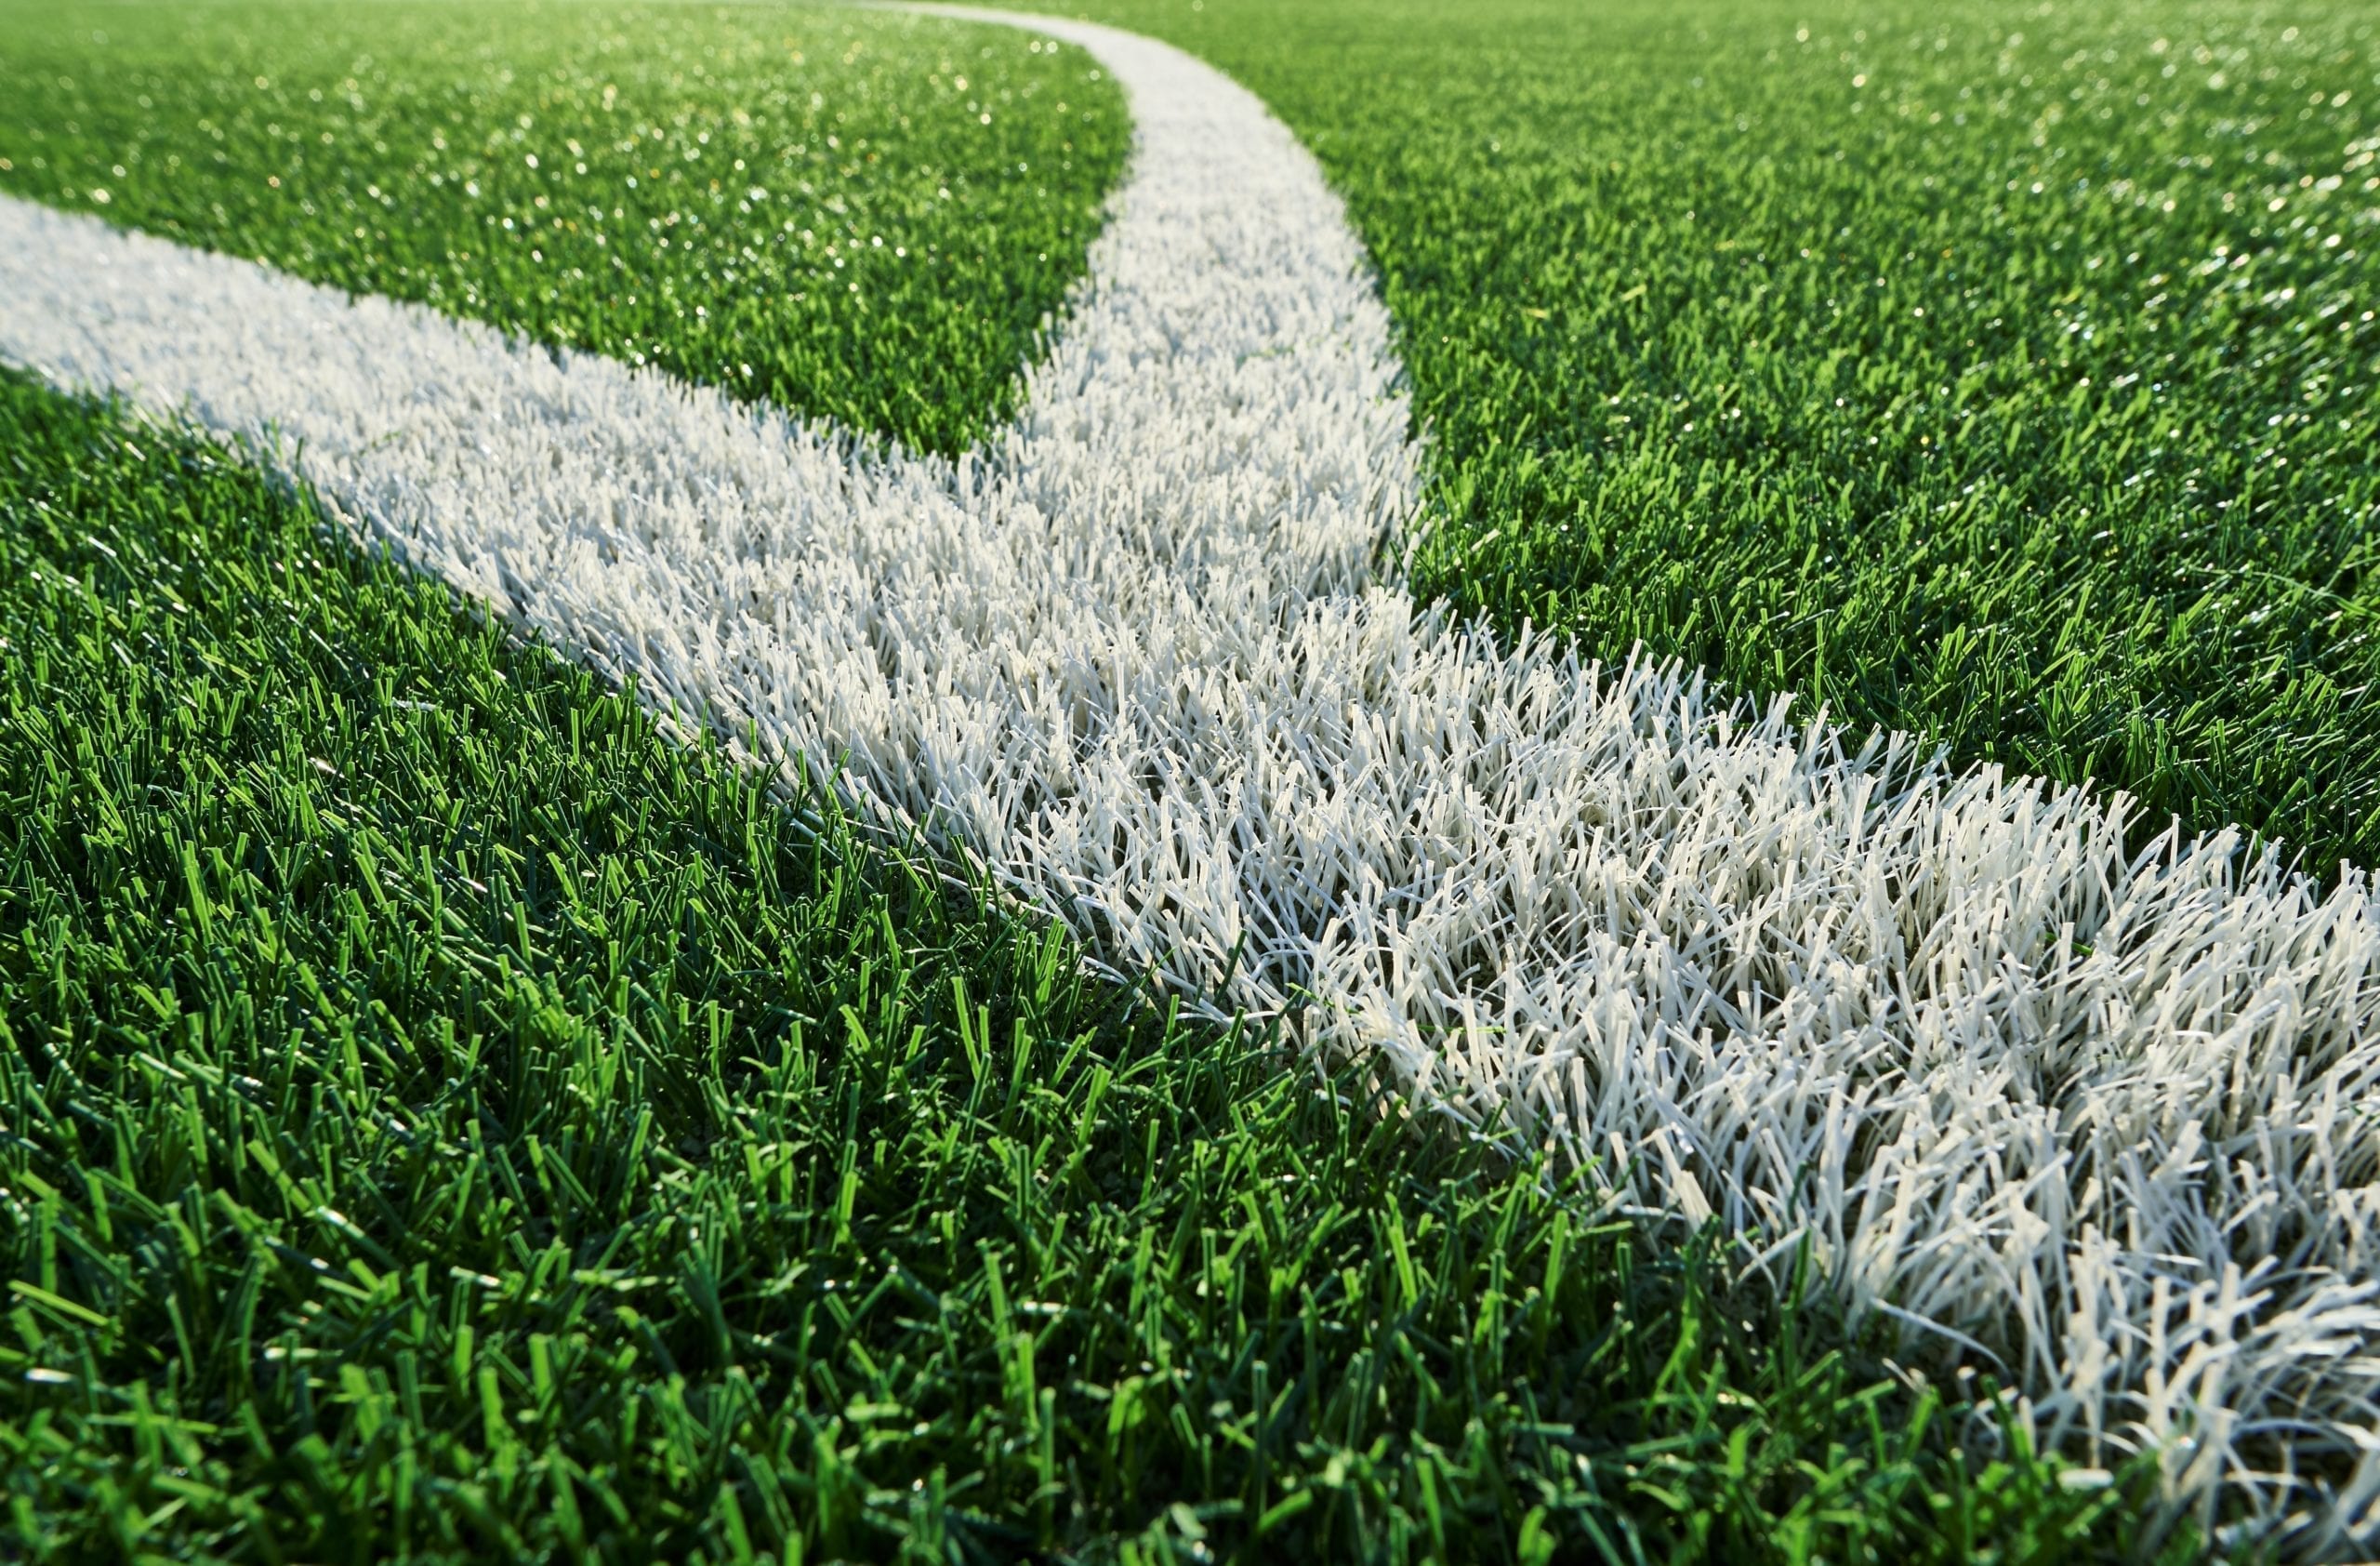 Sport Group and Polytan are well prepared for impending EU plastic granulate ban on synthetic turf